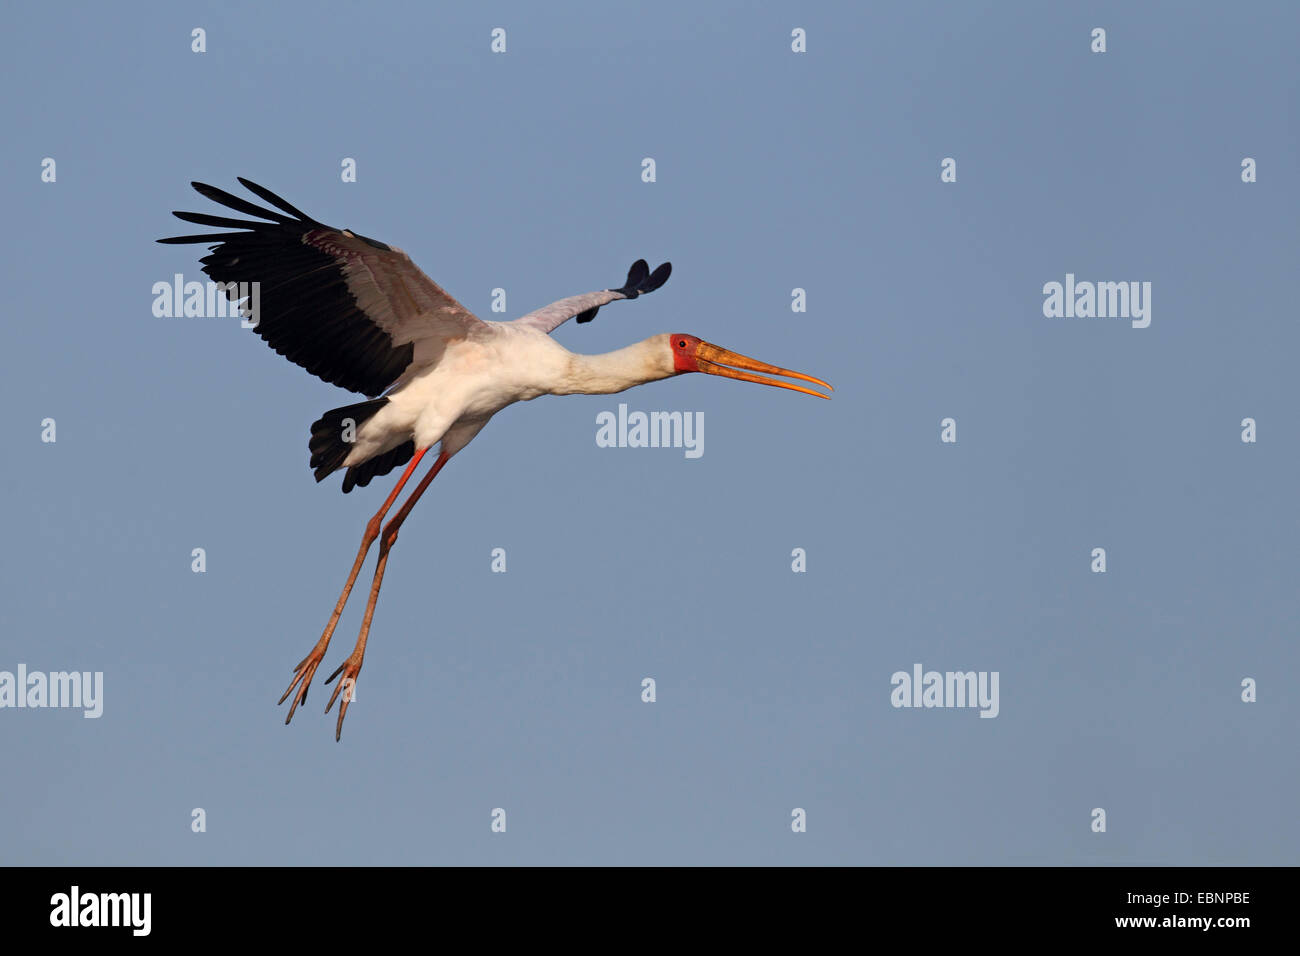 yellow-billed stork (Mycteria ibis), in landing approach, South Africa, Kruger National Park Stock Photo